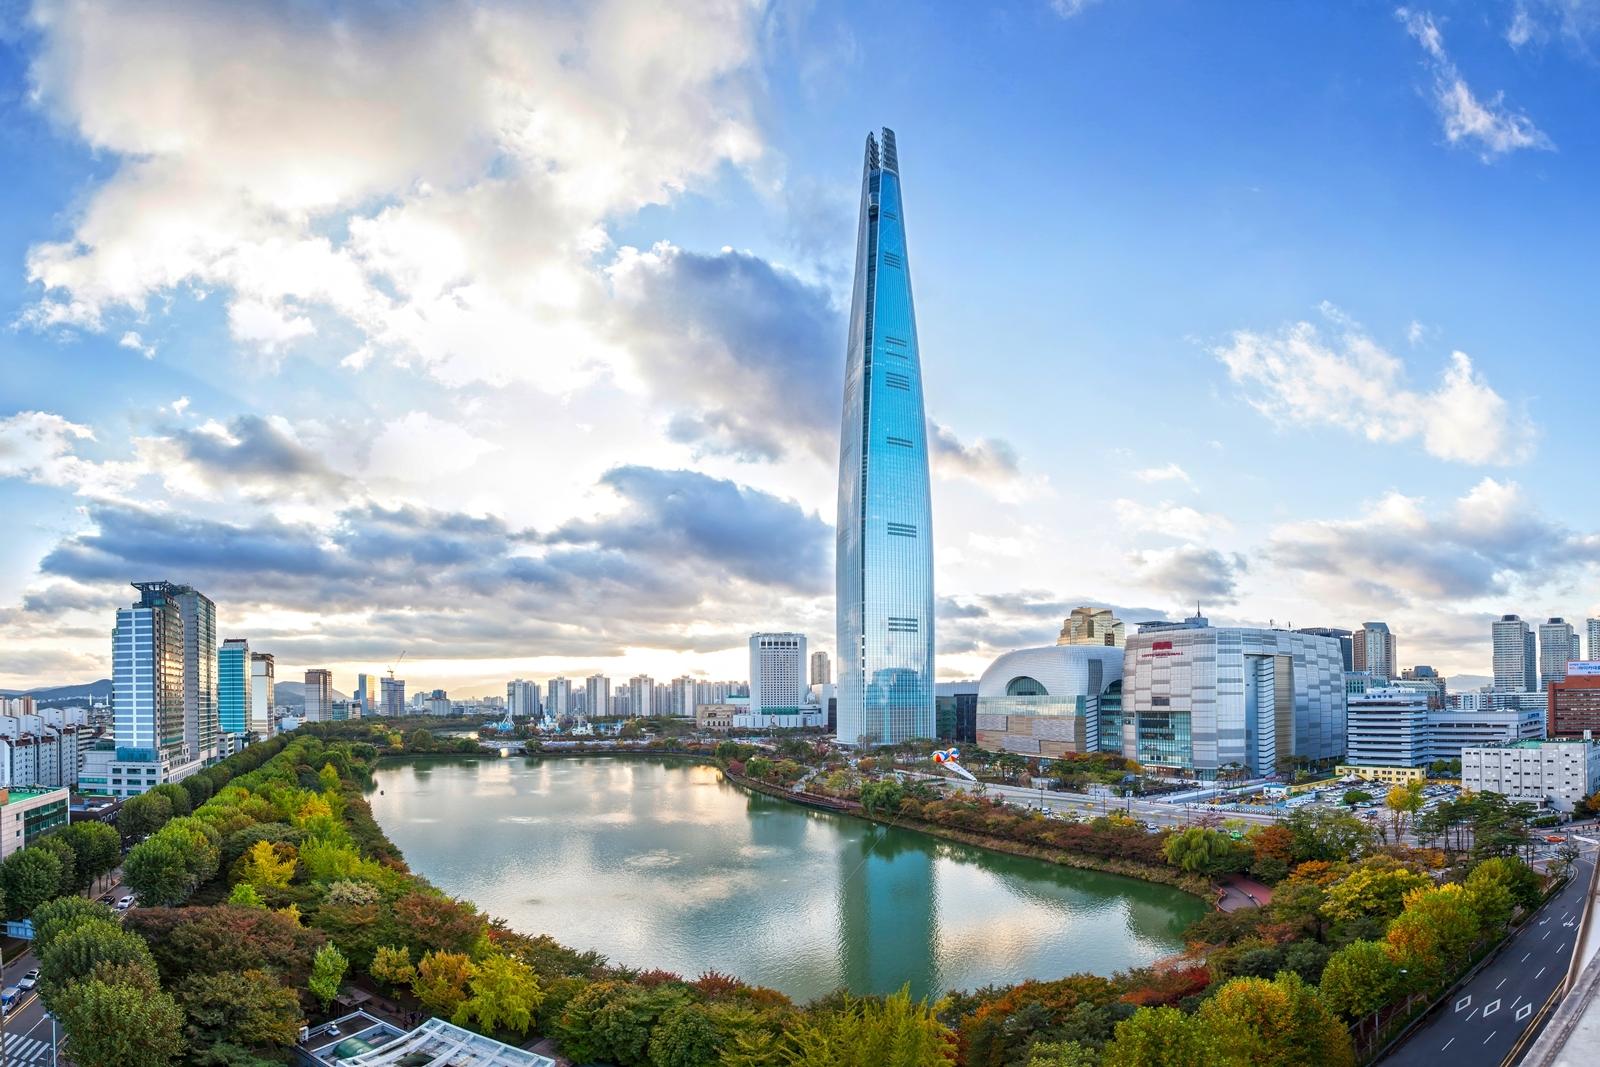 Gallery of Seoul's Lotte World Tower Completes as World's 5th Tallest Building - 1